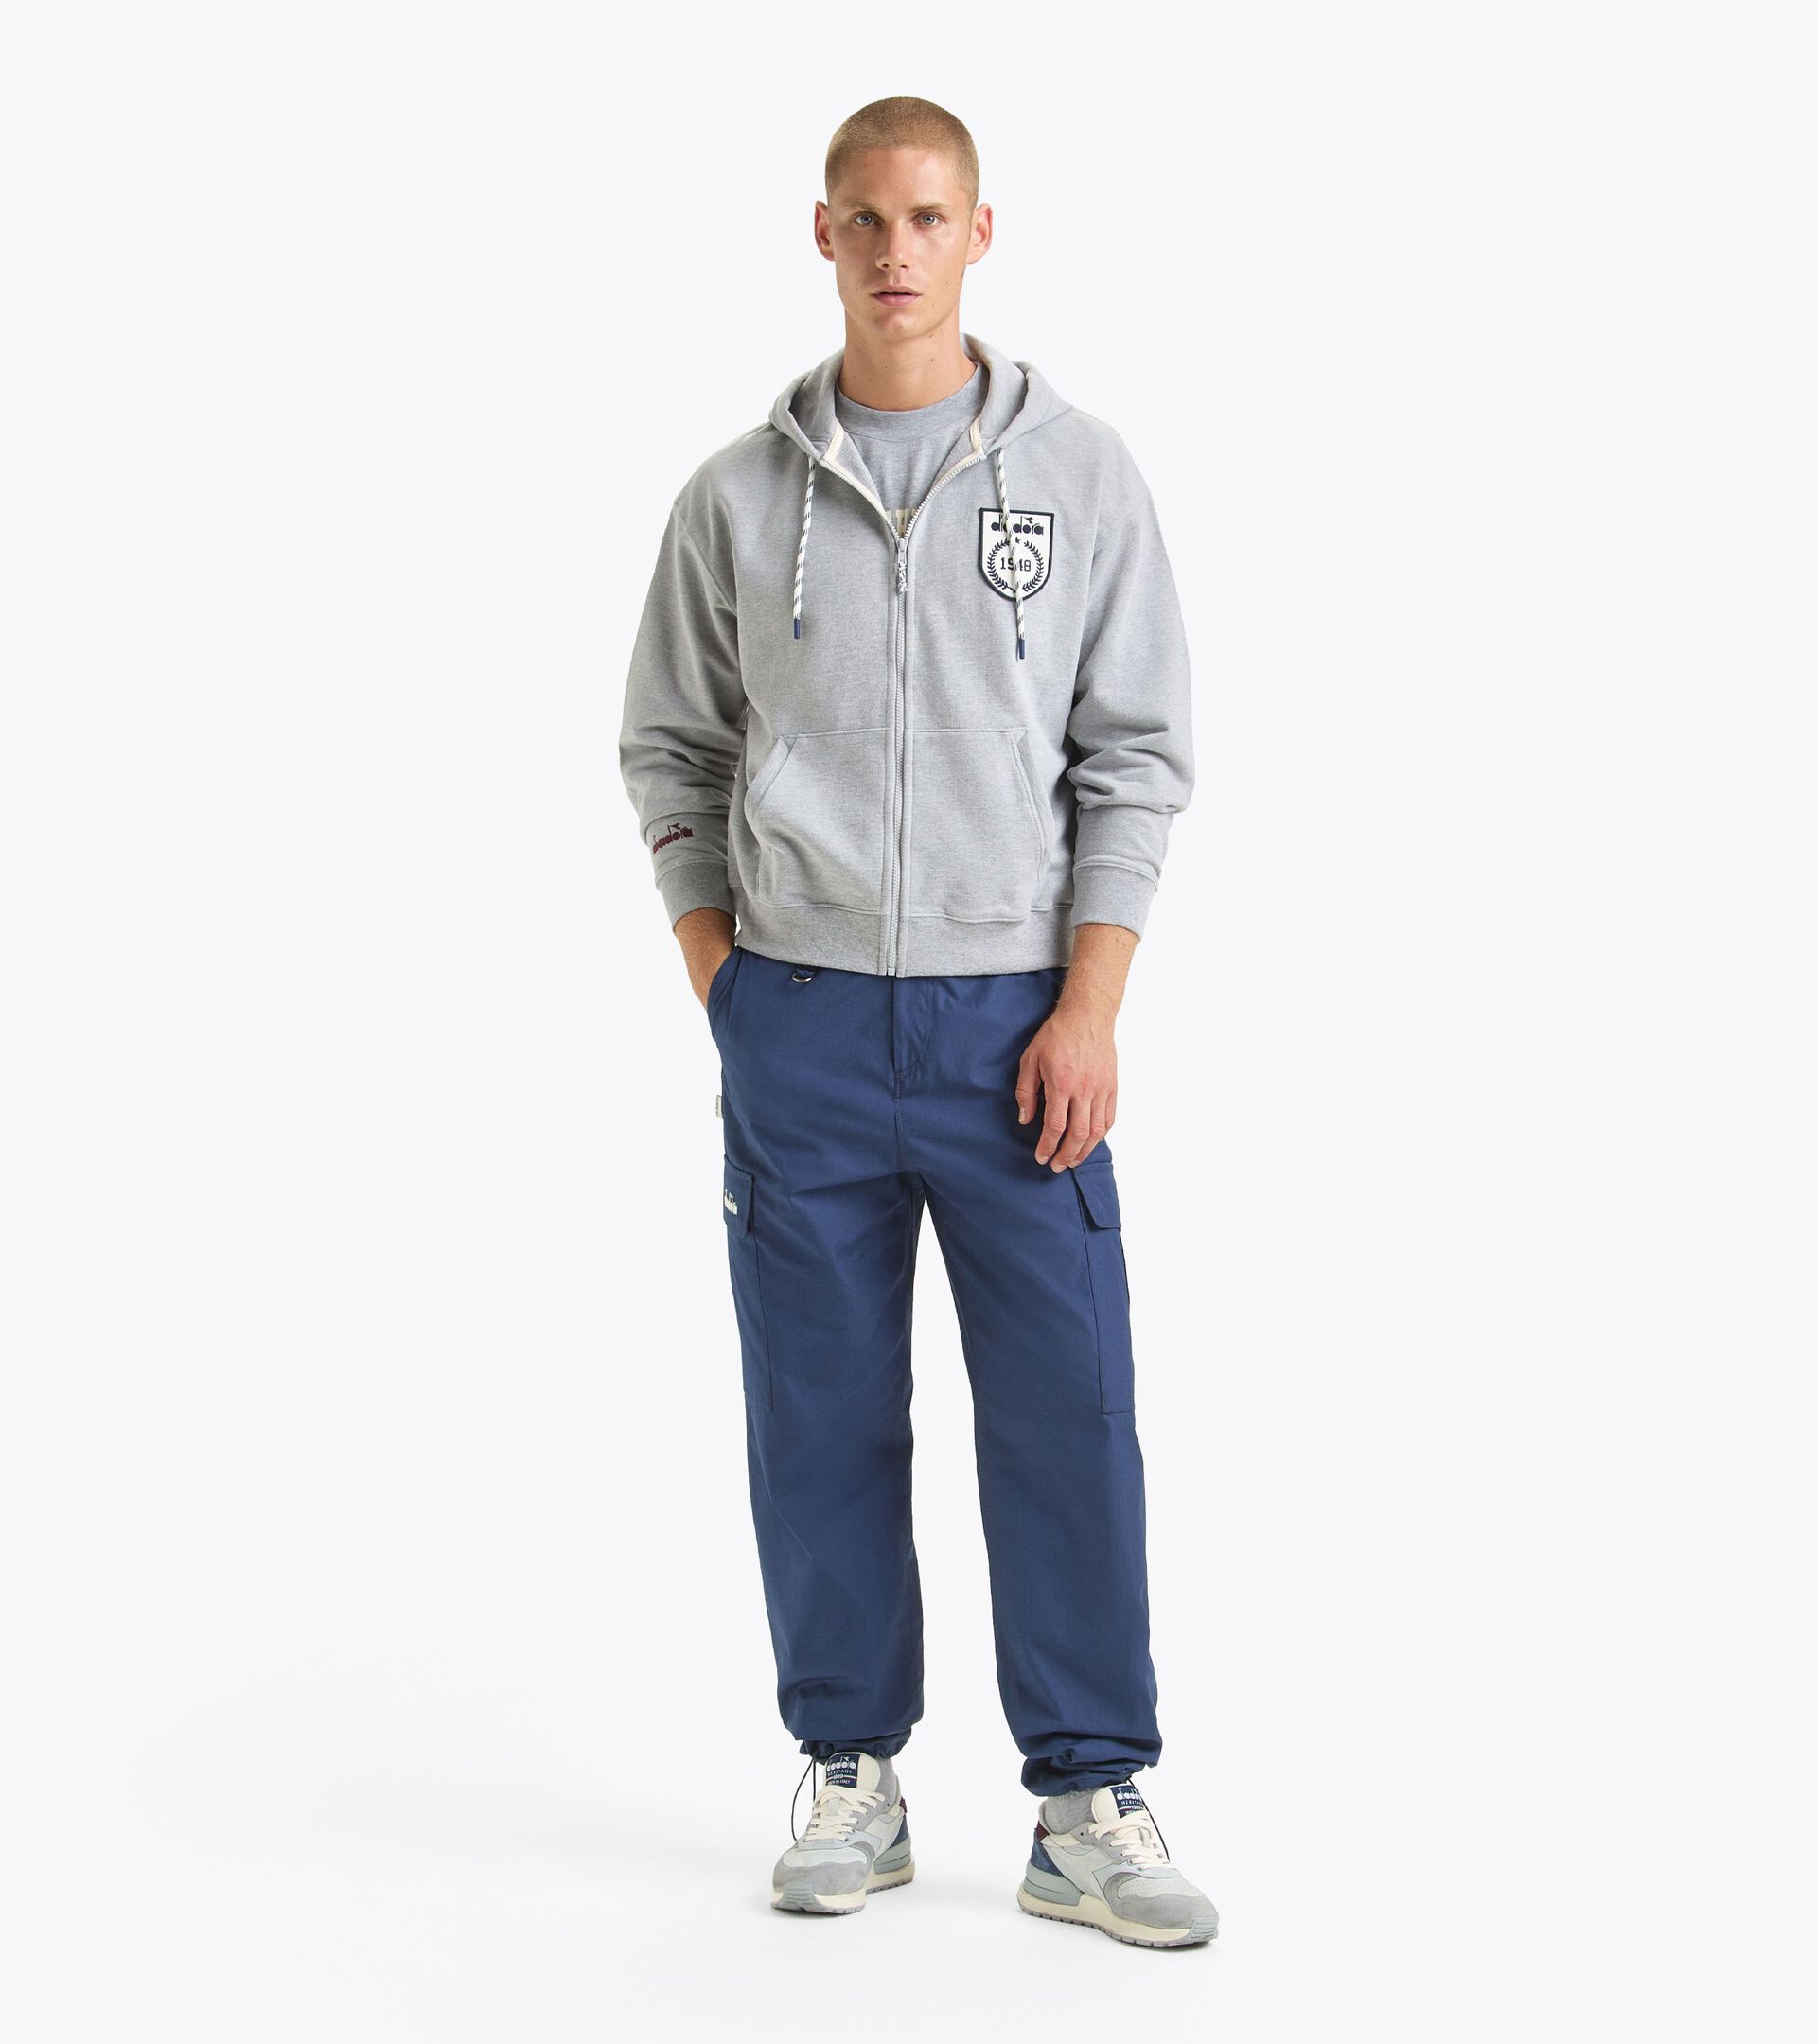 Workwear sporty pants - Made in Italy - Gender Neutral PANT LEGACY OCEANA - Diadora